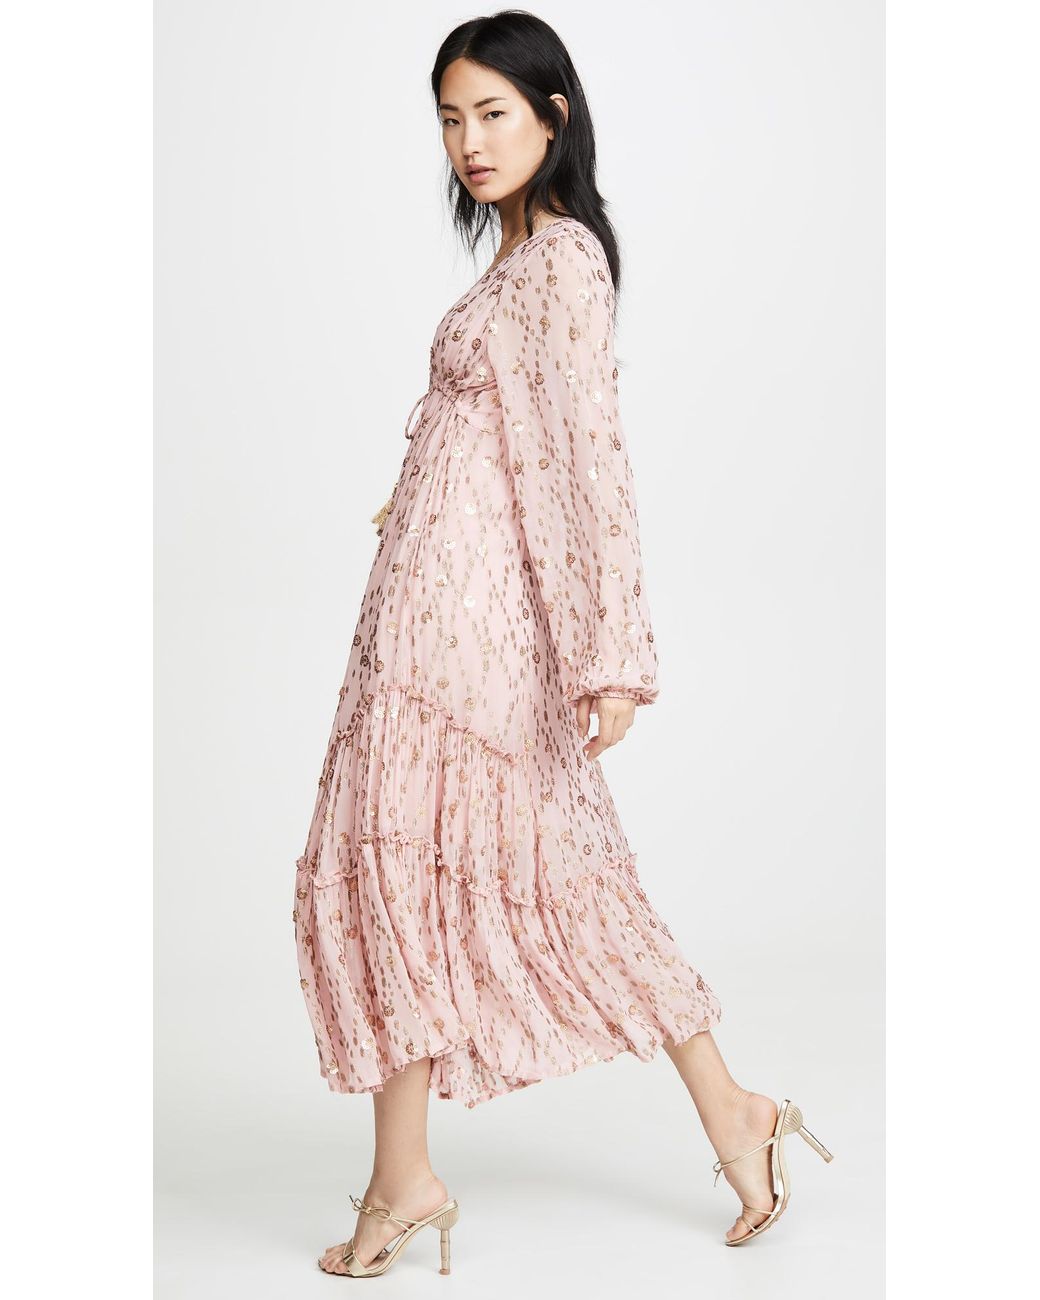 Free People Celina Maxi Dress in Pink | Lyst